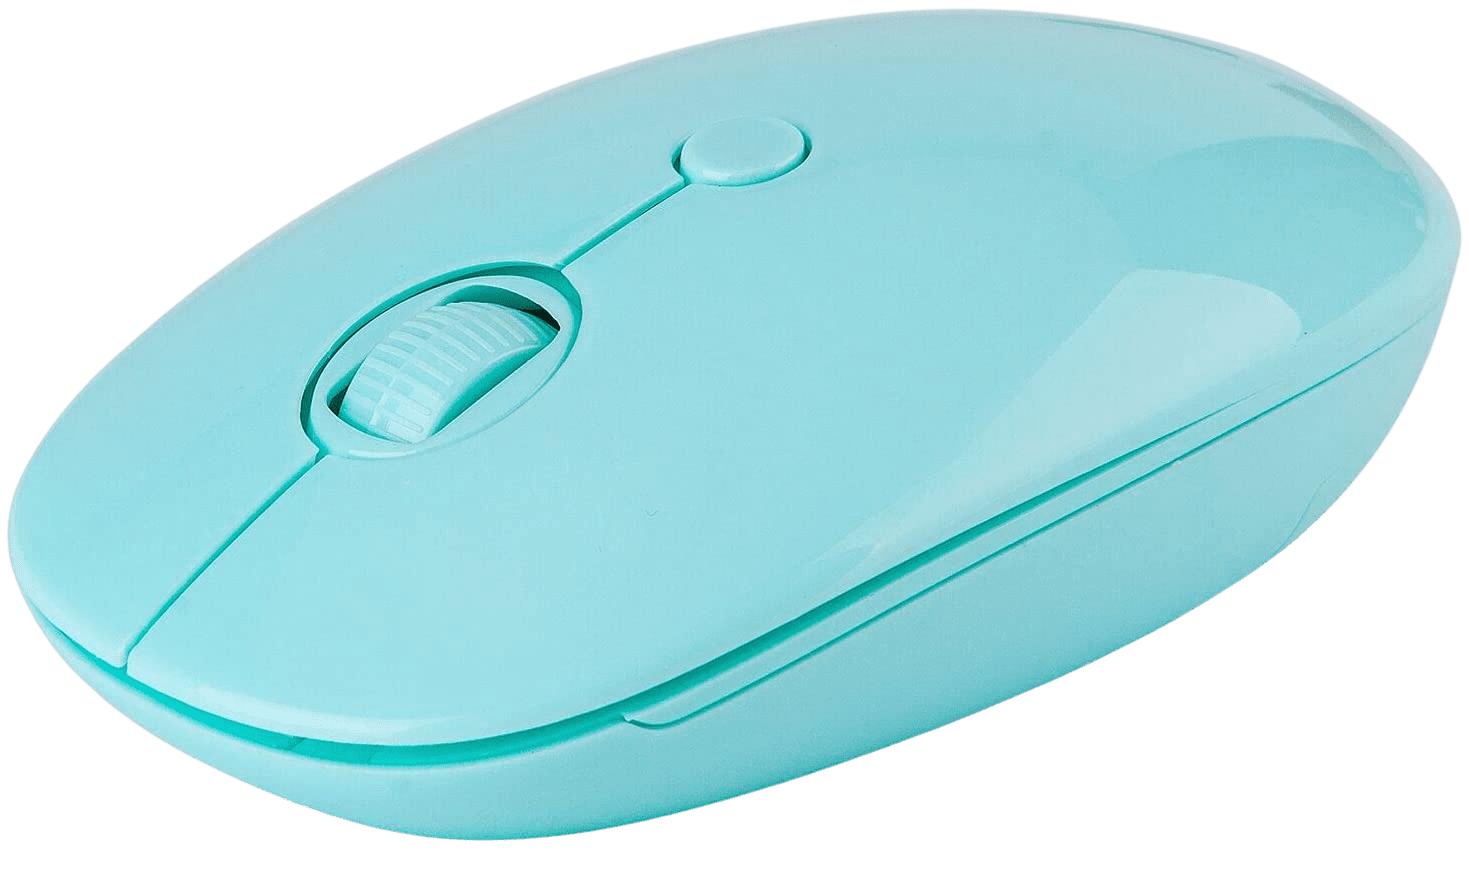 Wireless Mouse(New Upgrade),Rii RM800 2.4G Silm Wireless Mouse with USB Receiver,Computer Mice,Light Weight Mouse for PC ,Laptop,Windows/Mac/Linux,Mint Green (RM800) - Home Decor Gifts and More